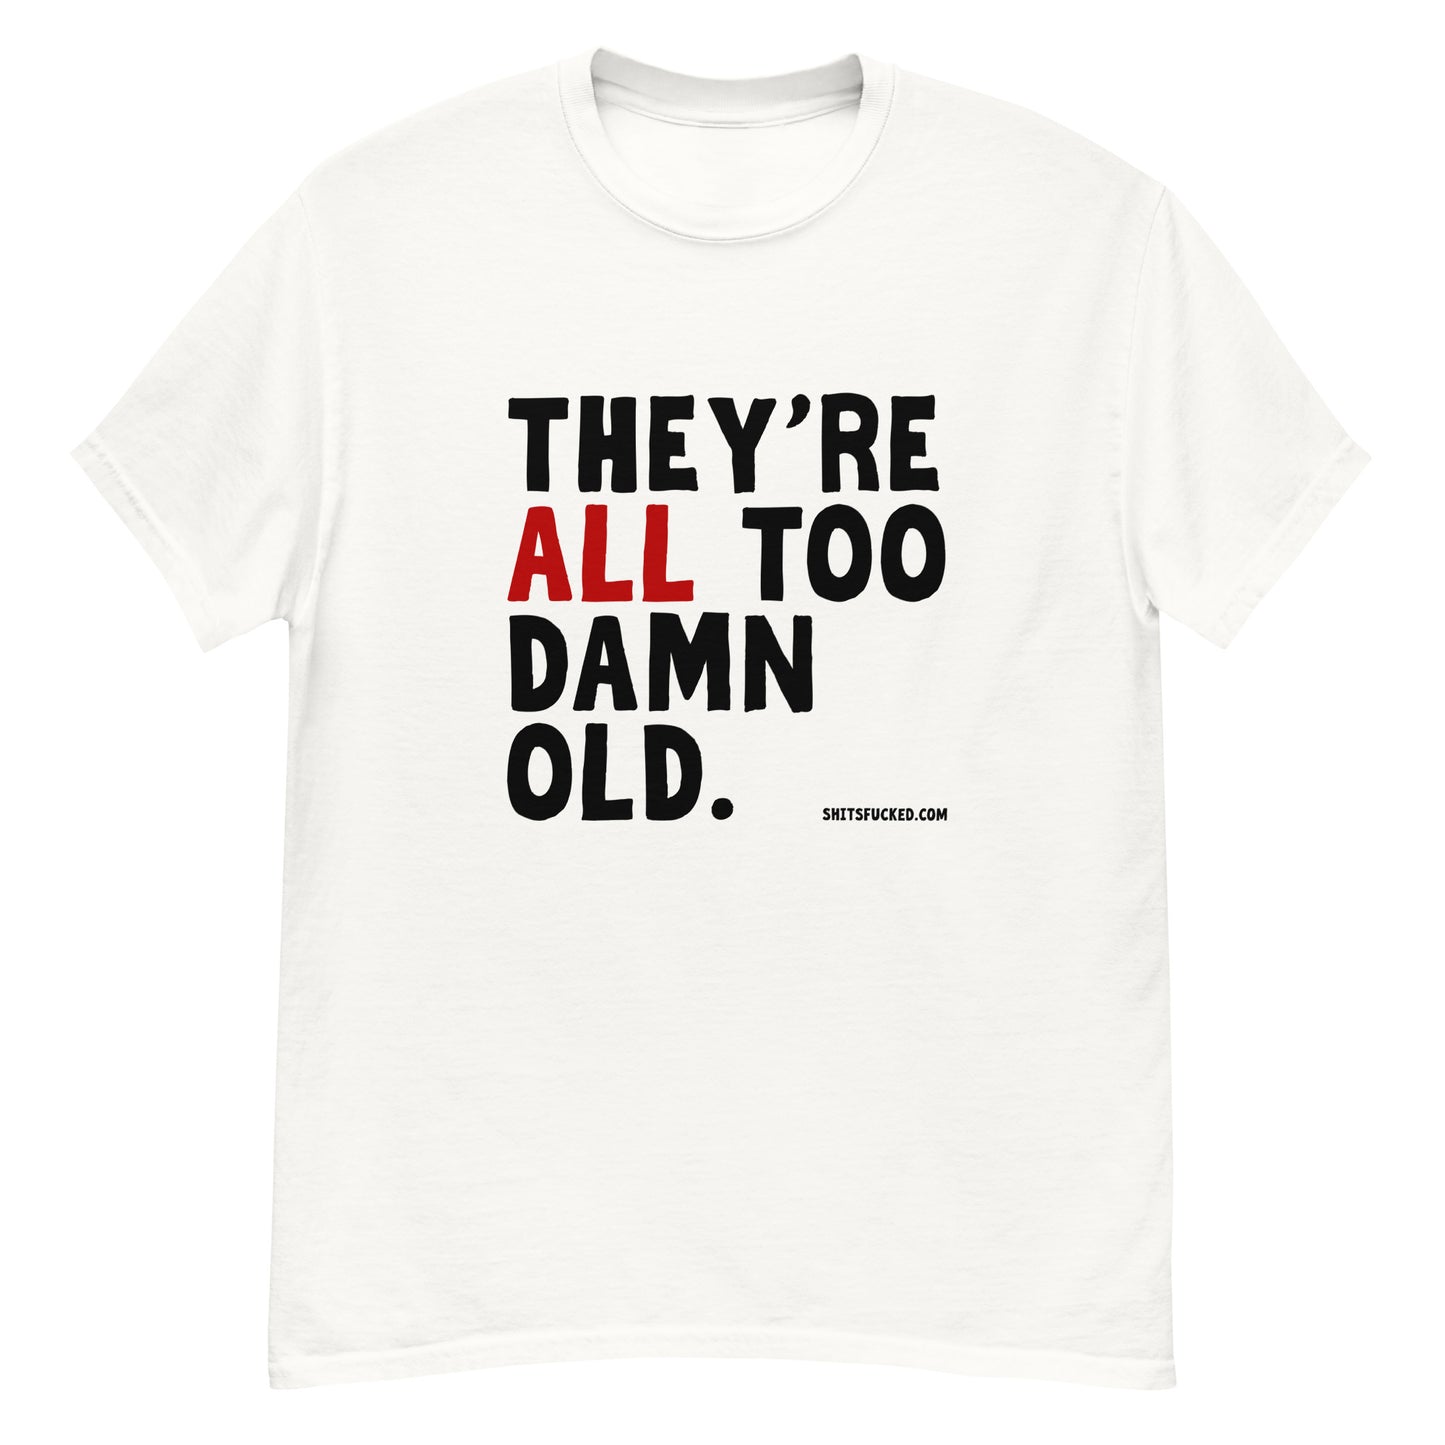 A funny political shirt that says they're all too damn old